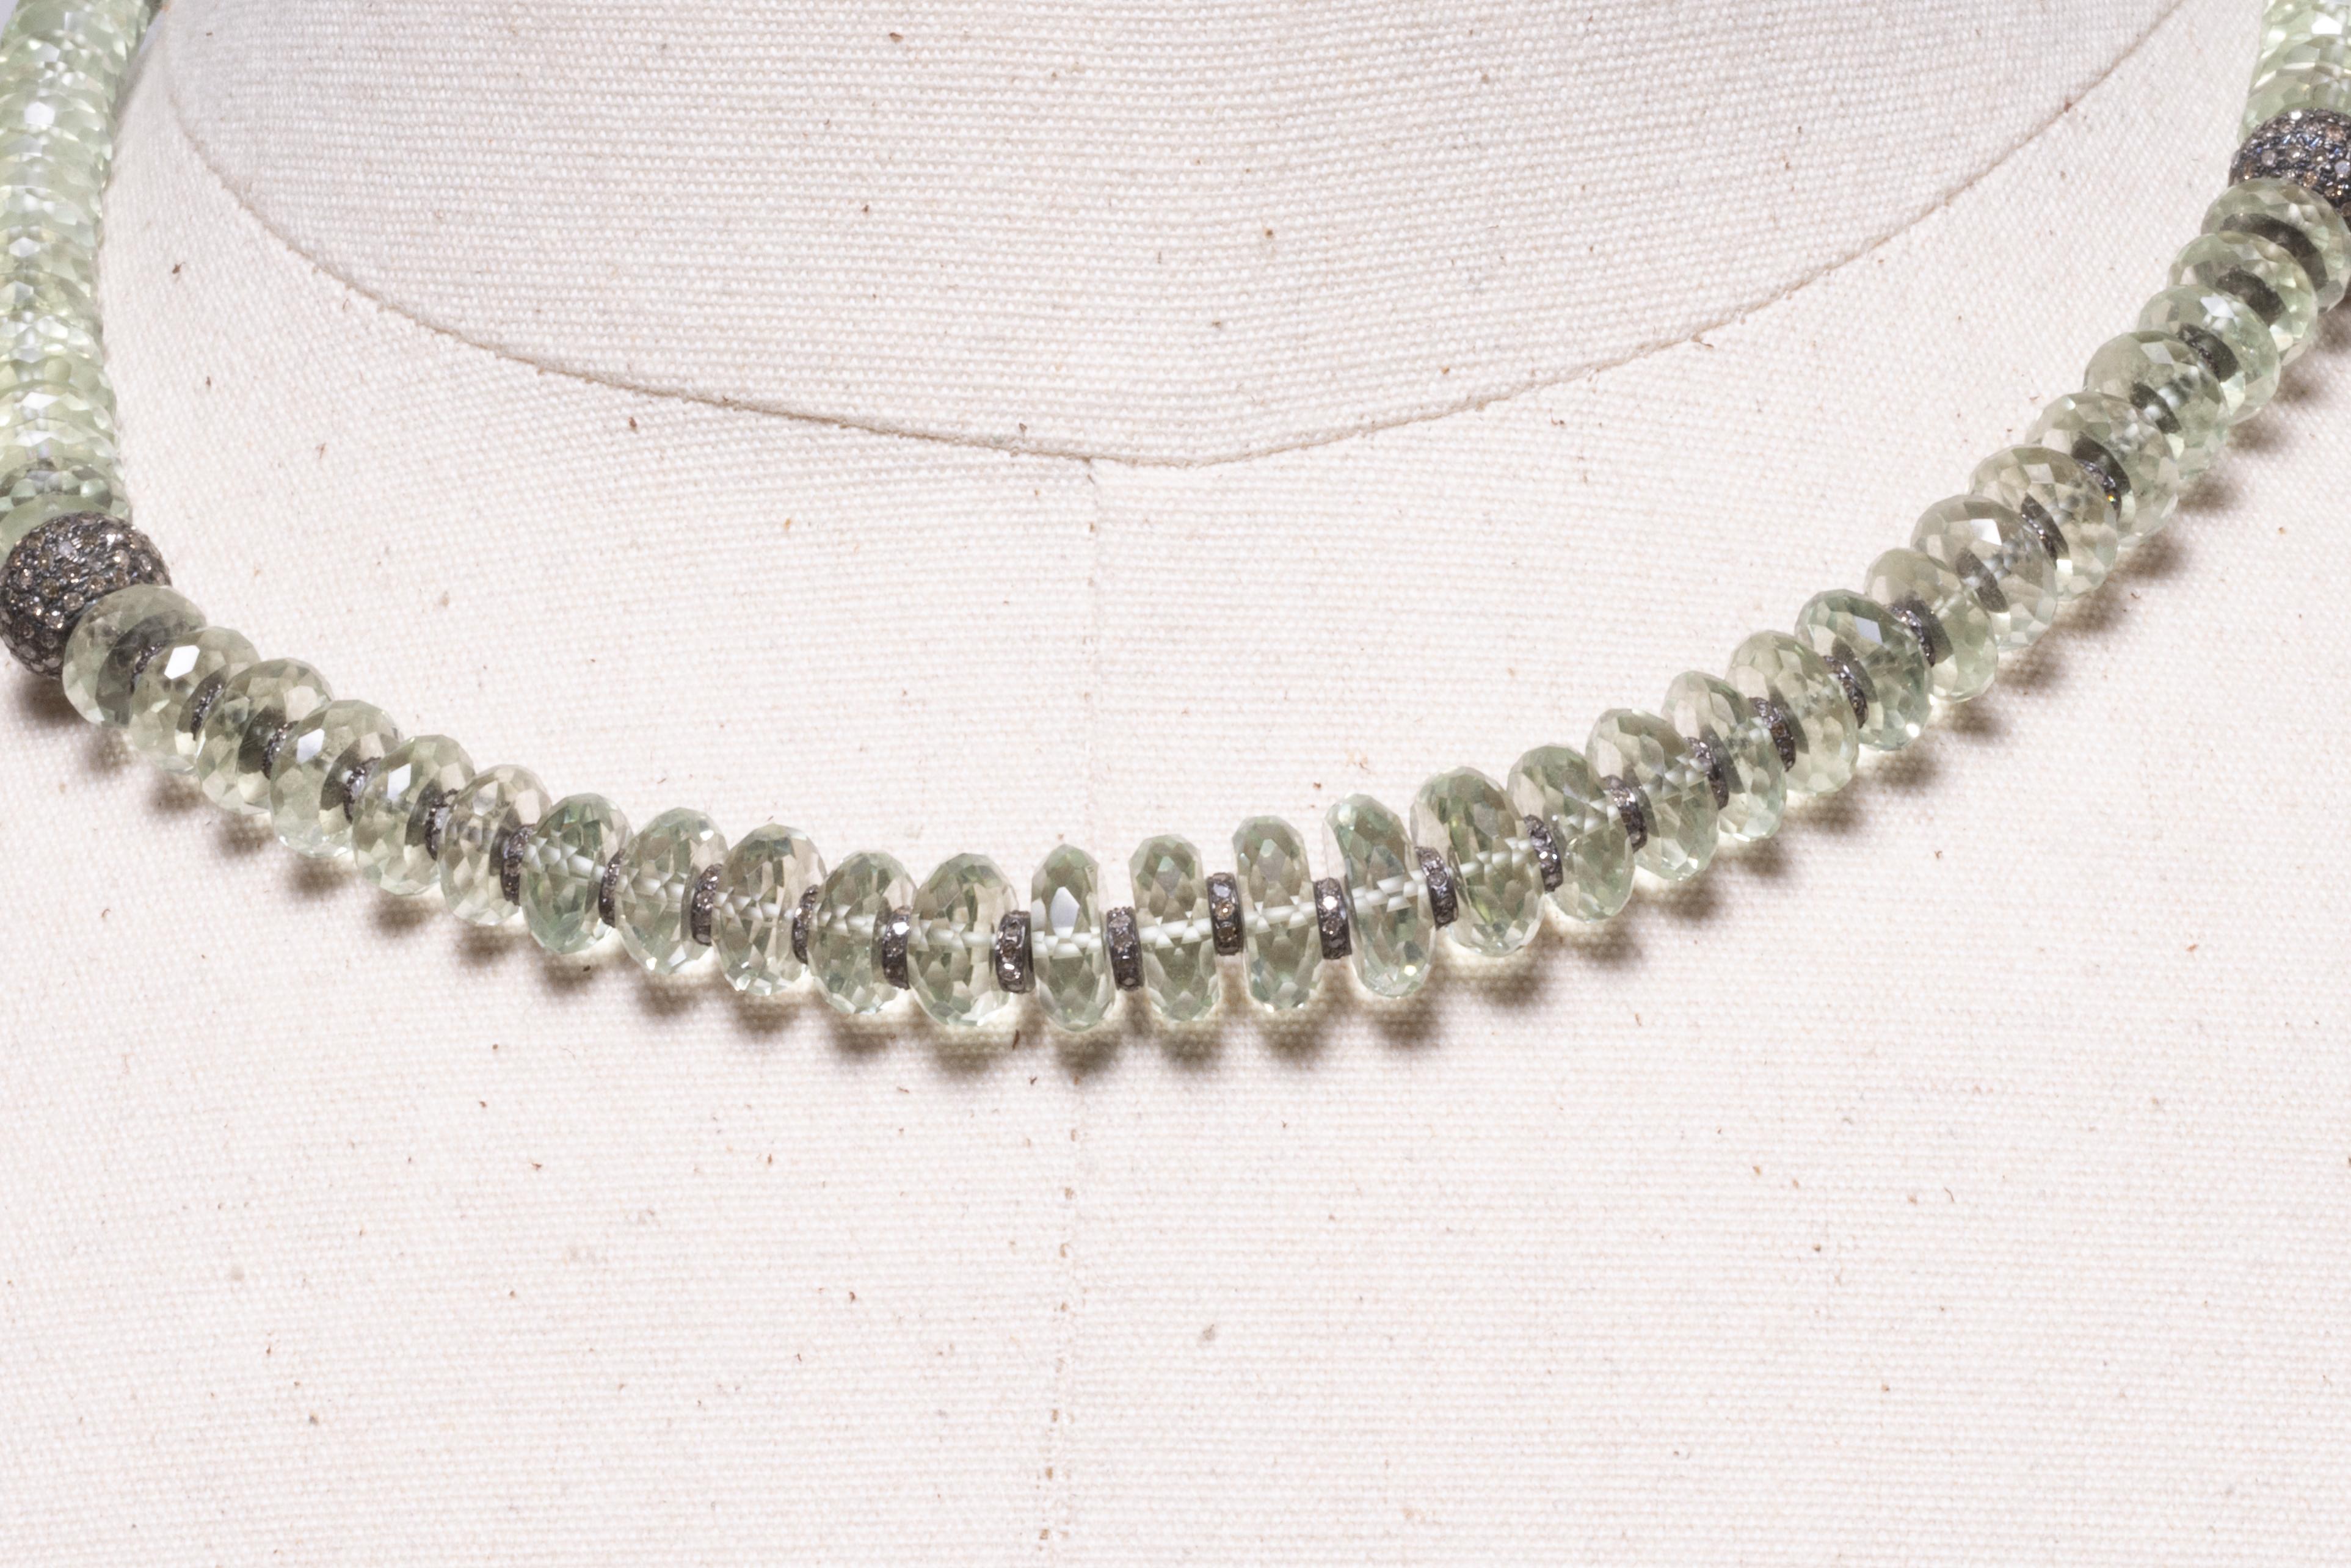 Faceted round prasiolite (green amethyst) beads with diamond rondelles in between and a pave`- set bead at each collarbone set in an oxidized sterling silver, as are the rondelles.  It has extra chain at the back to adjust from 16.5